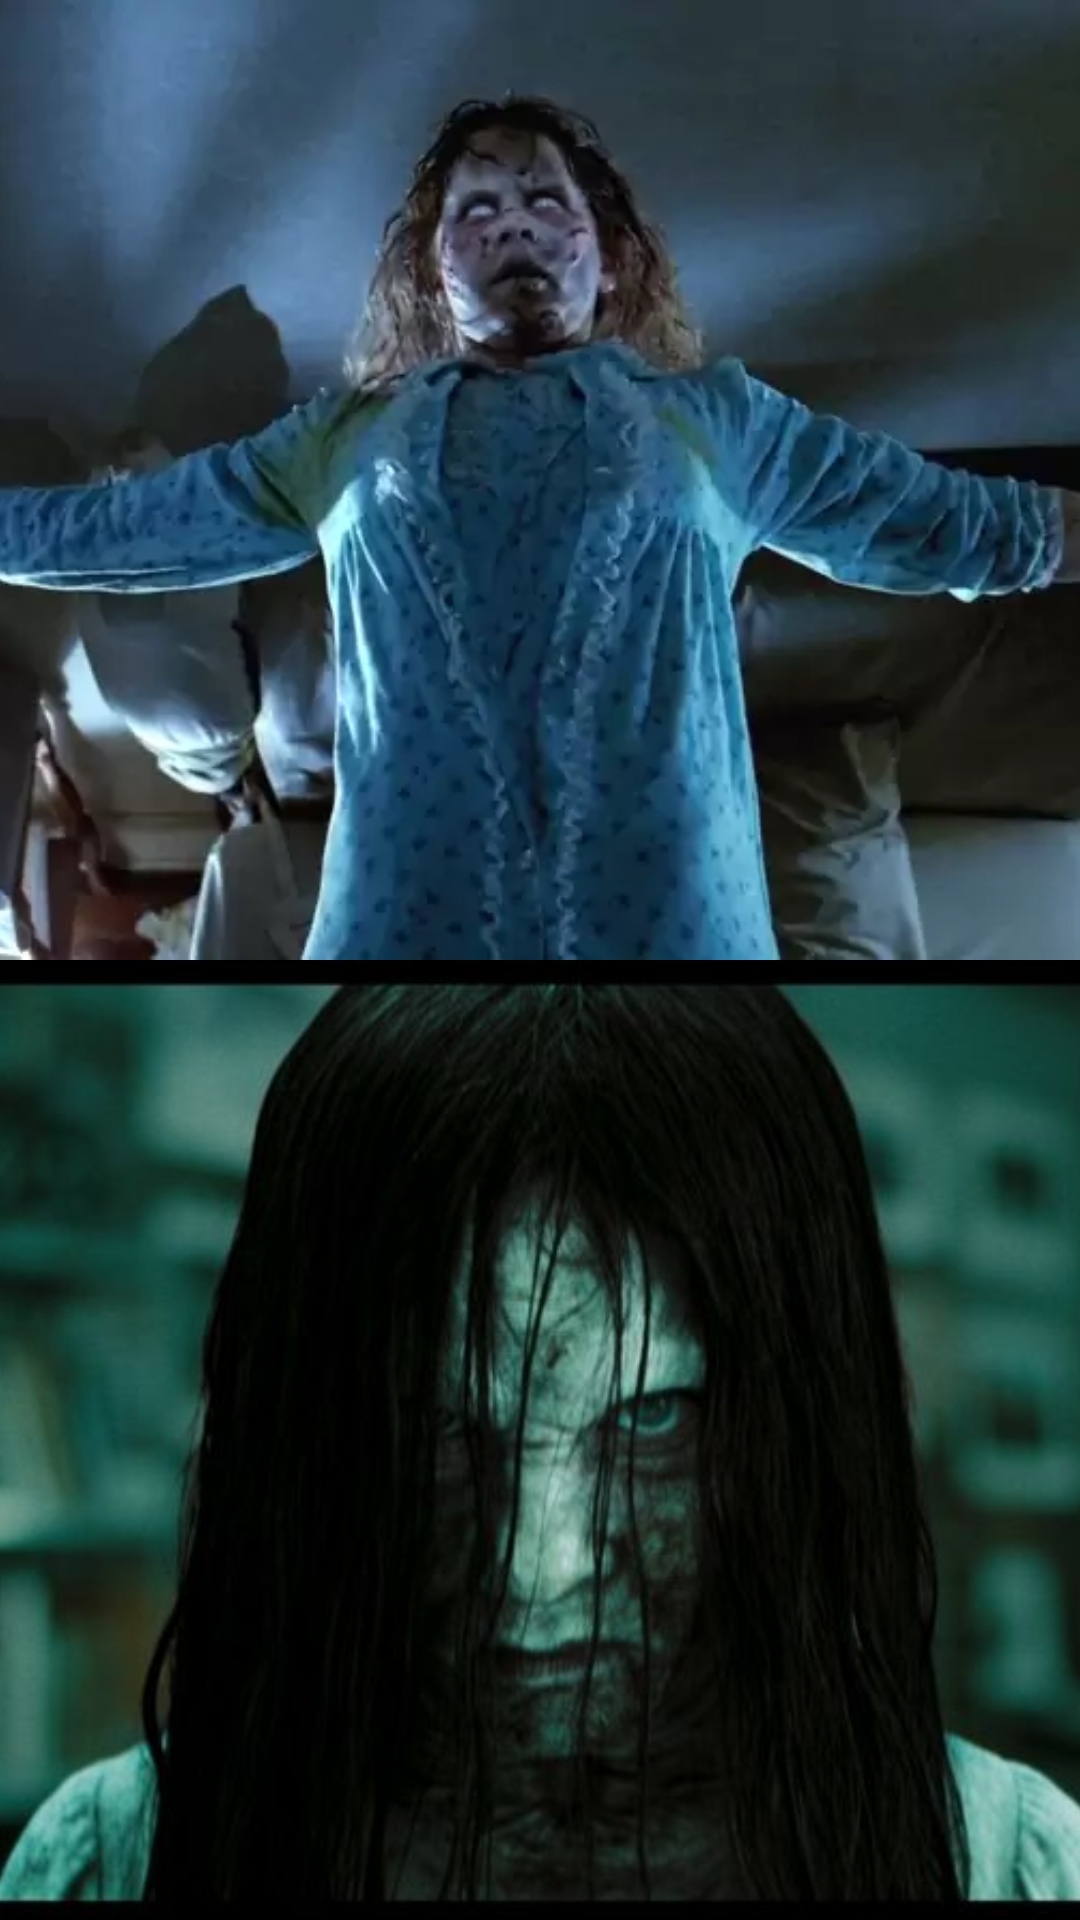 The Grudge 3 streaming: where to watch movie online?